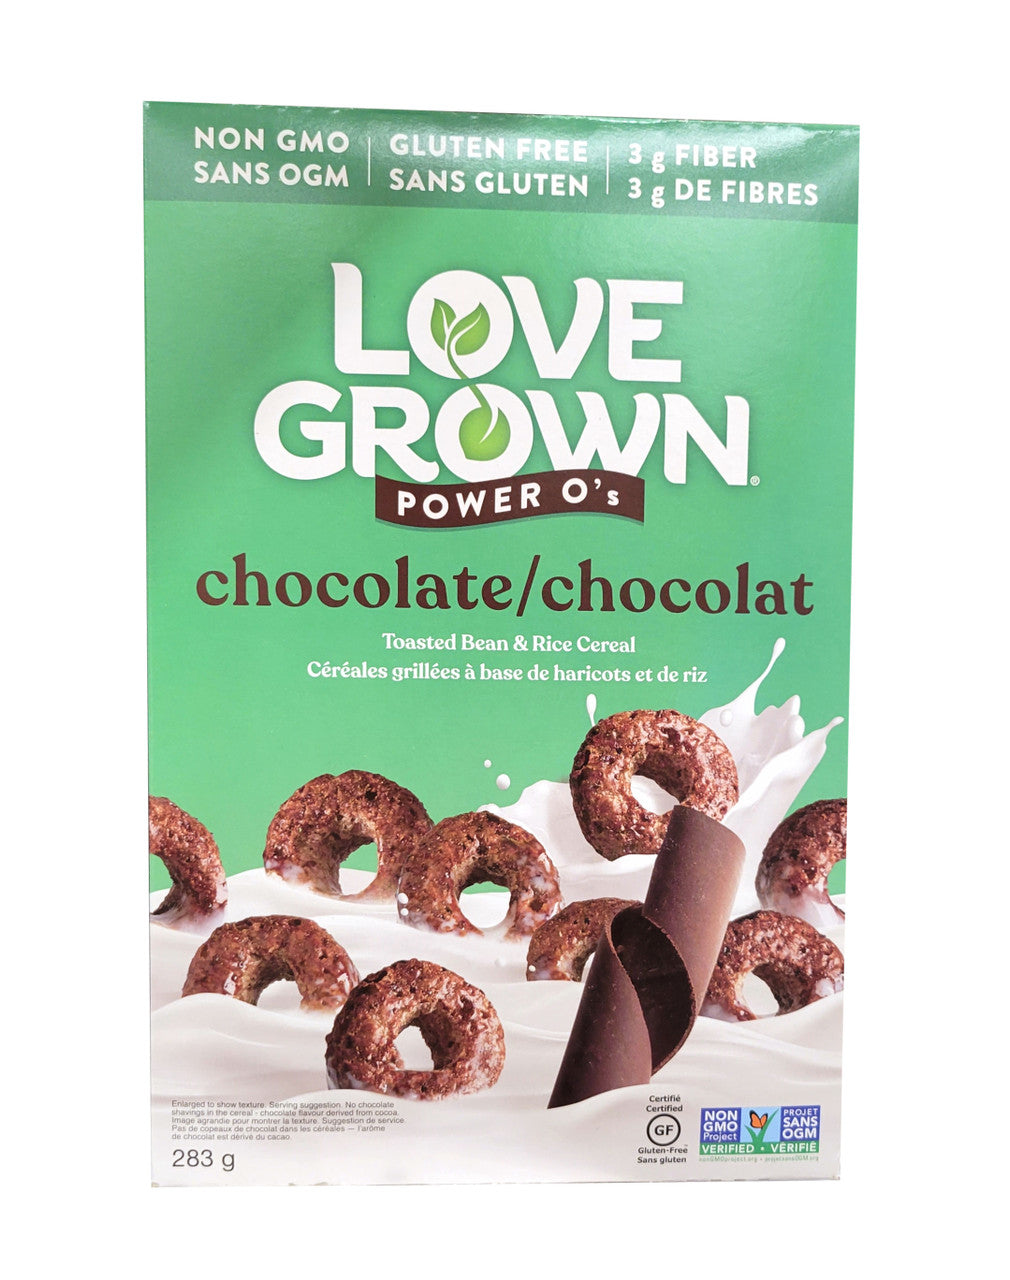 Love Grown Power O's, Chocolate Toasted Bean & Rice Cereal, Gluten Free, Vegan, 283g/9.9 oz. Box(Imported from Canada)